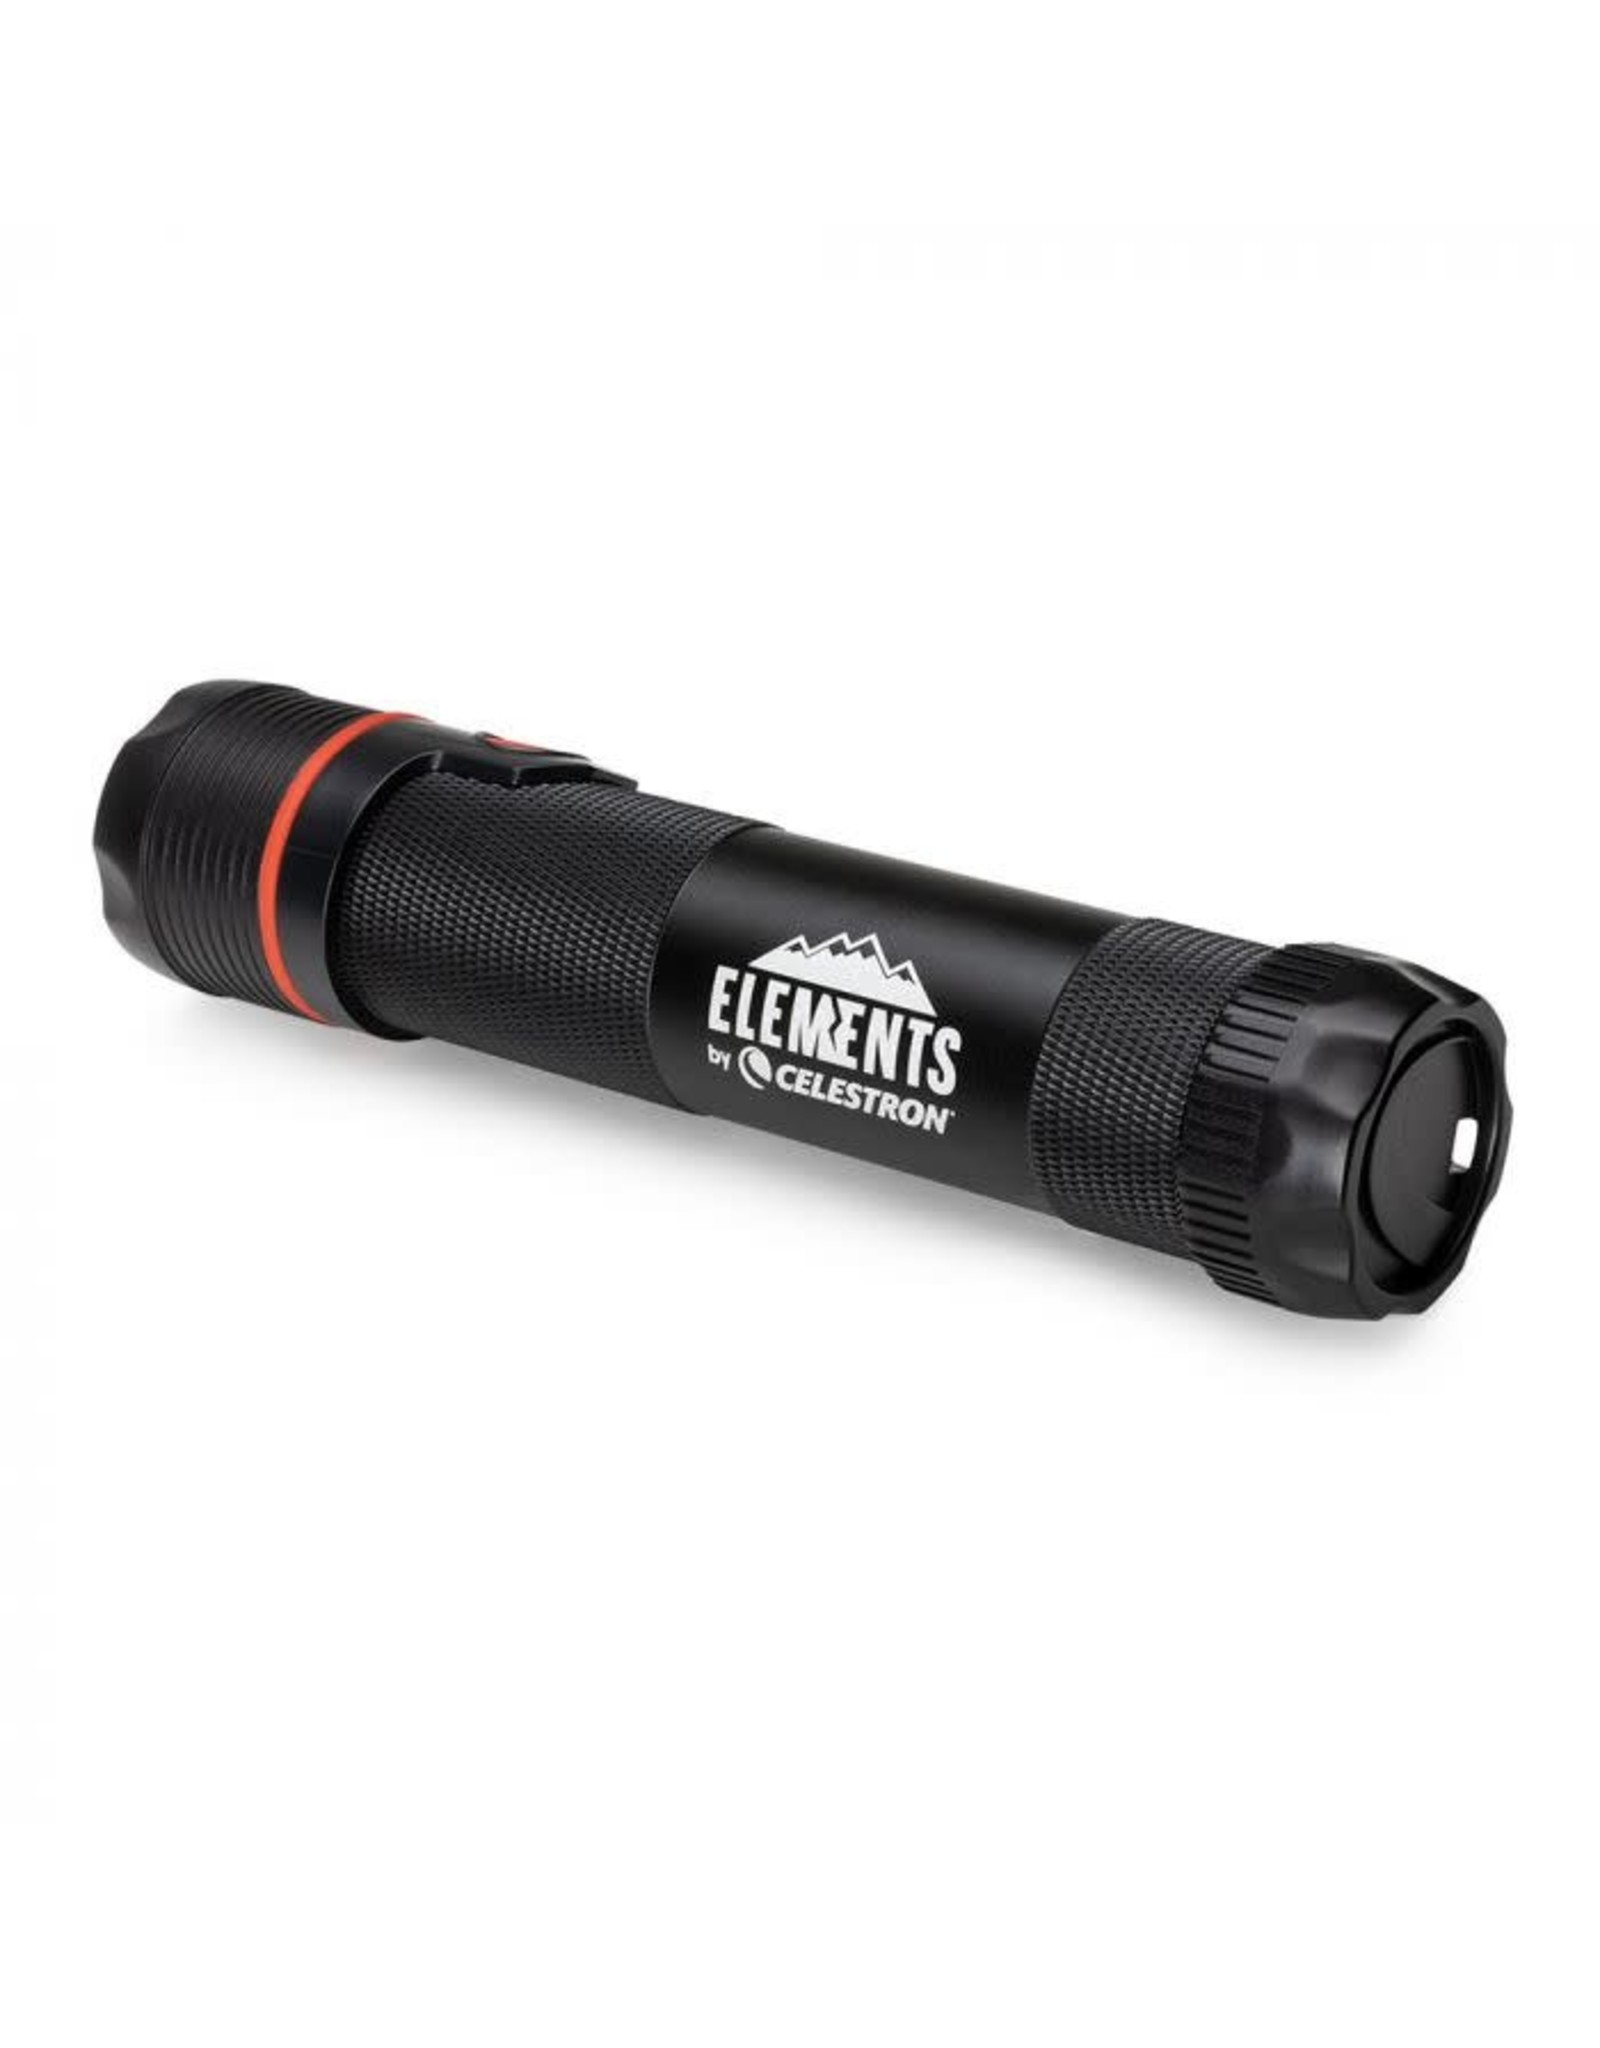 Celestron Celestron Elements ThermoTorch 3 Astro Red Flashlight/Warmer/Charger